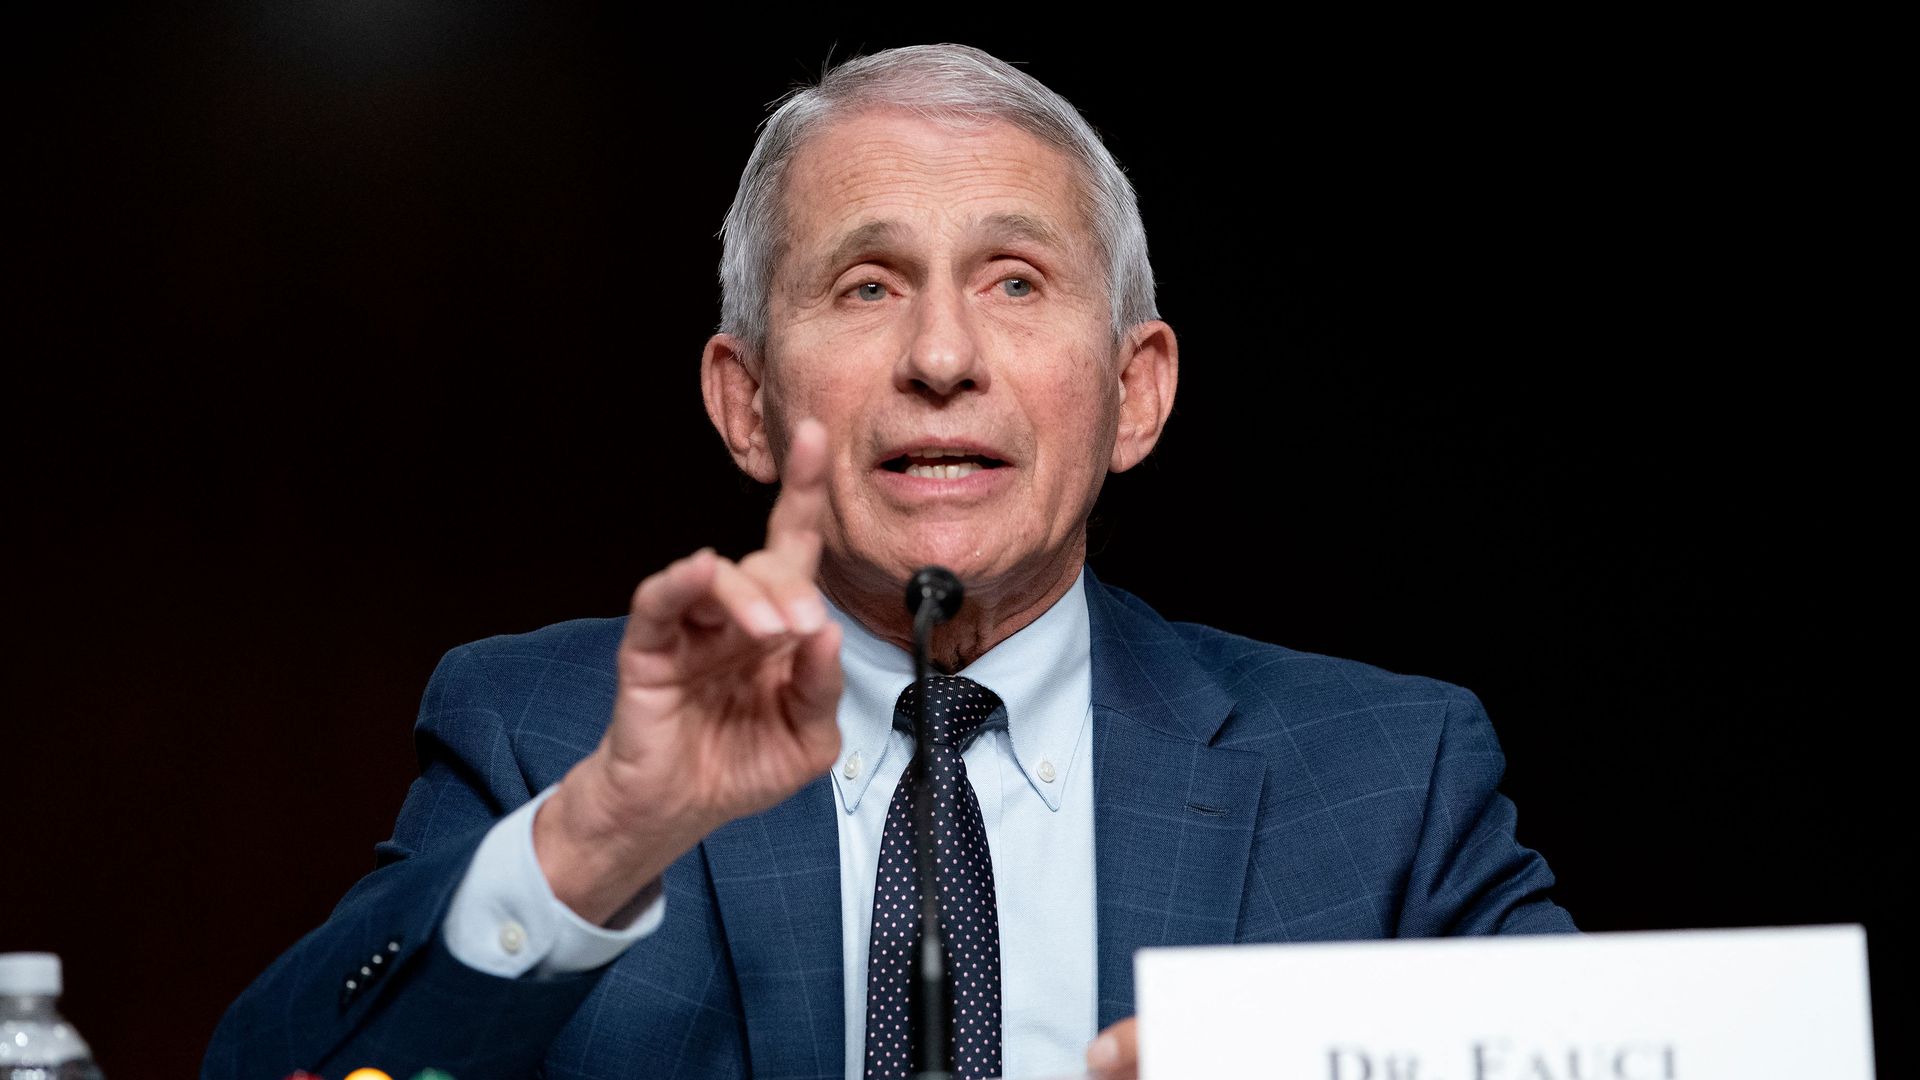 Dr. Anthony Fauci gives opening statements during a Senate hearing.